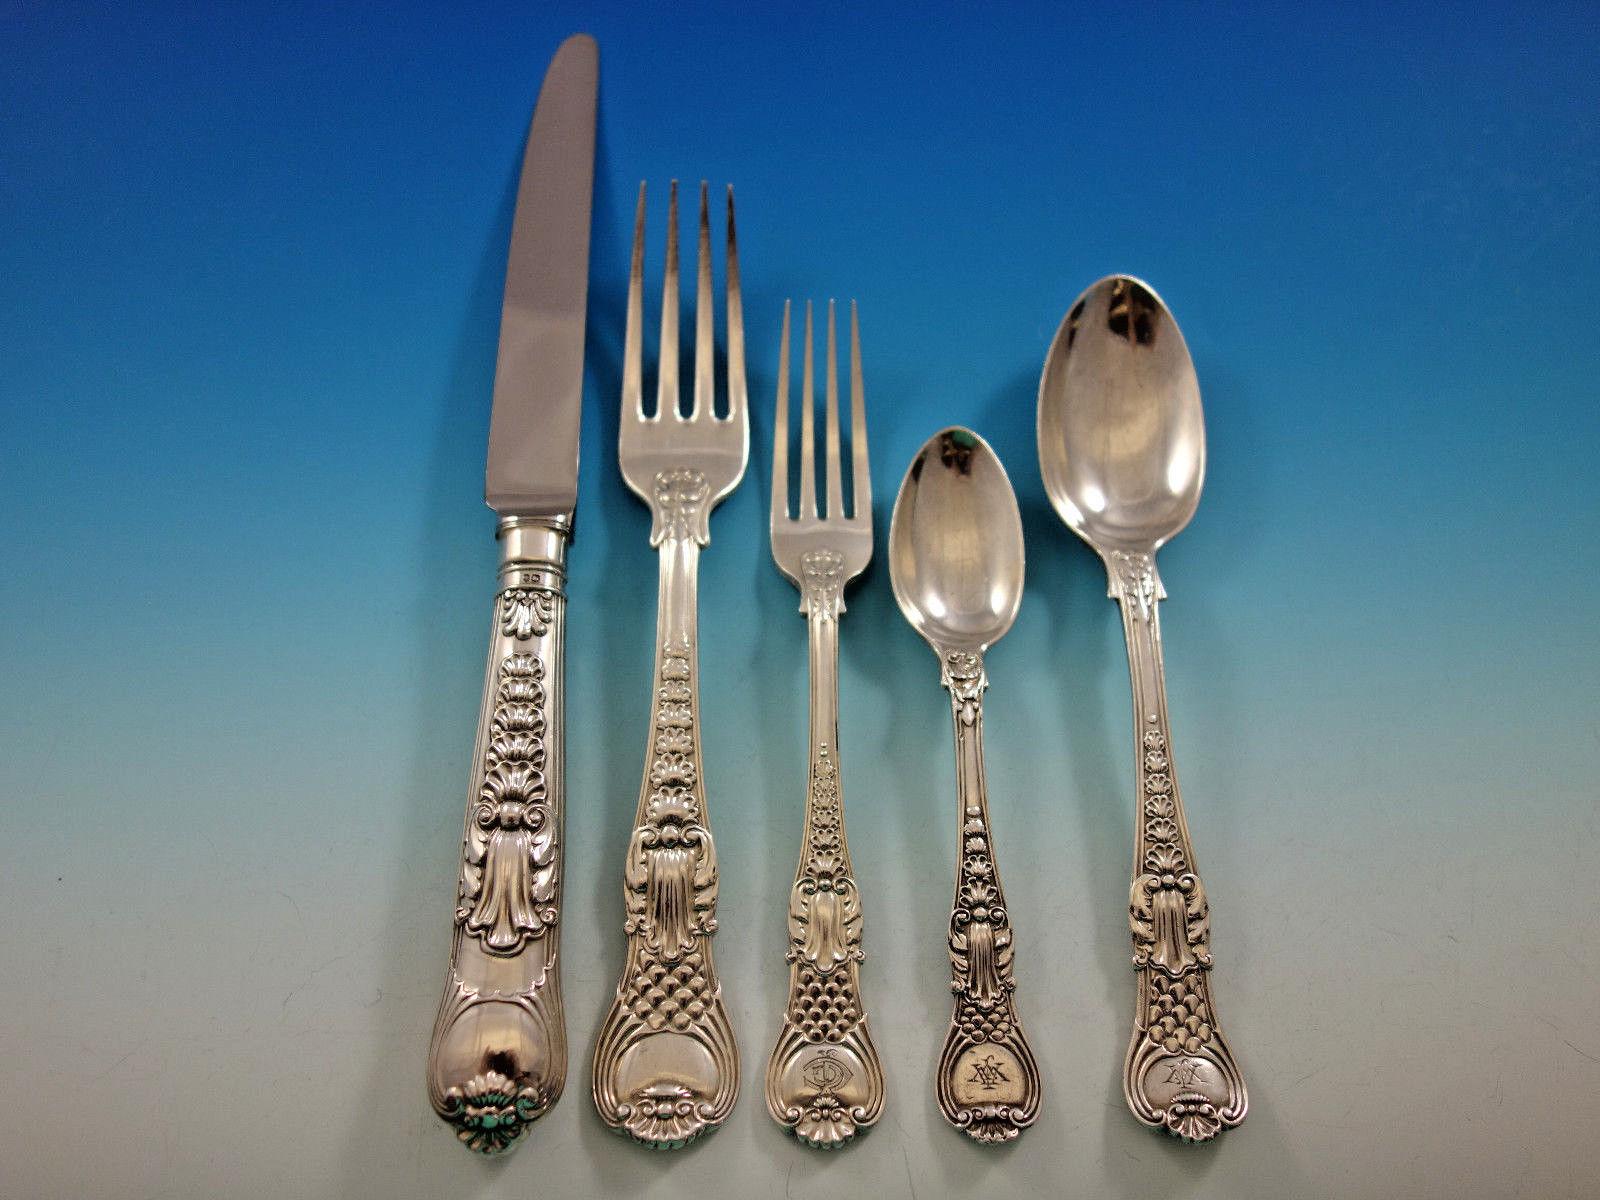 Dinner size Coburg by Various English makers sterling silver flatware set, 33 pieces. This set includes:

6 dinner size knives, 10 1/4